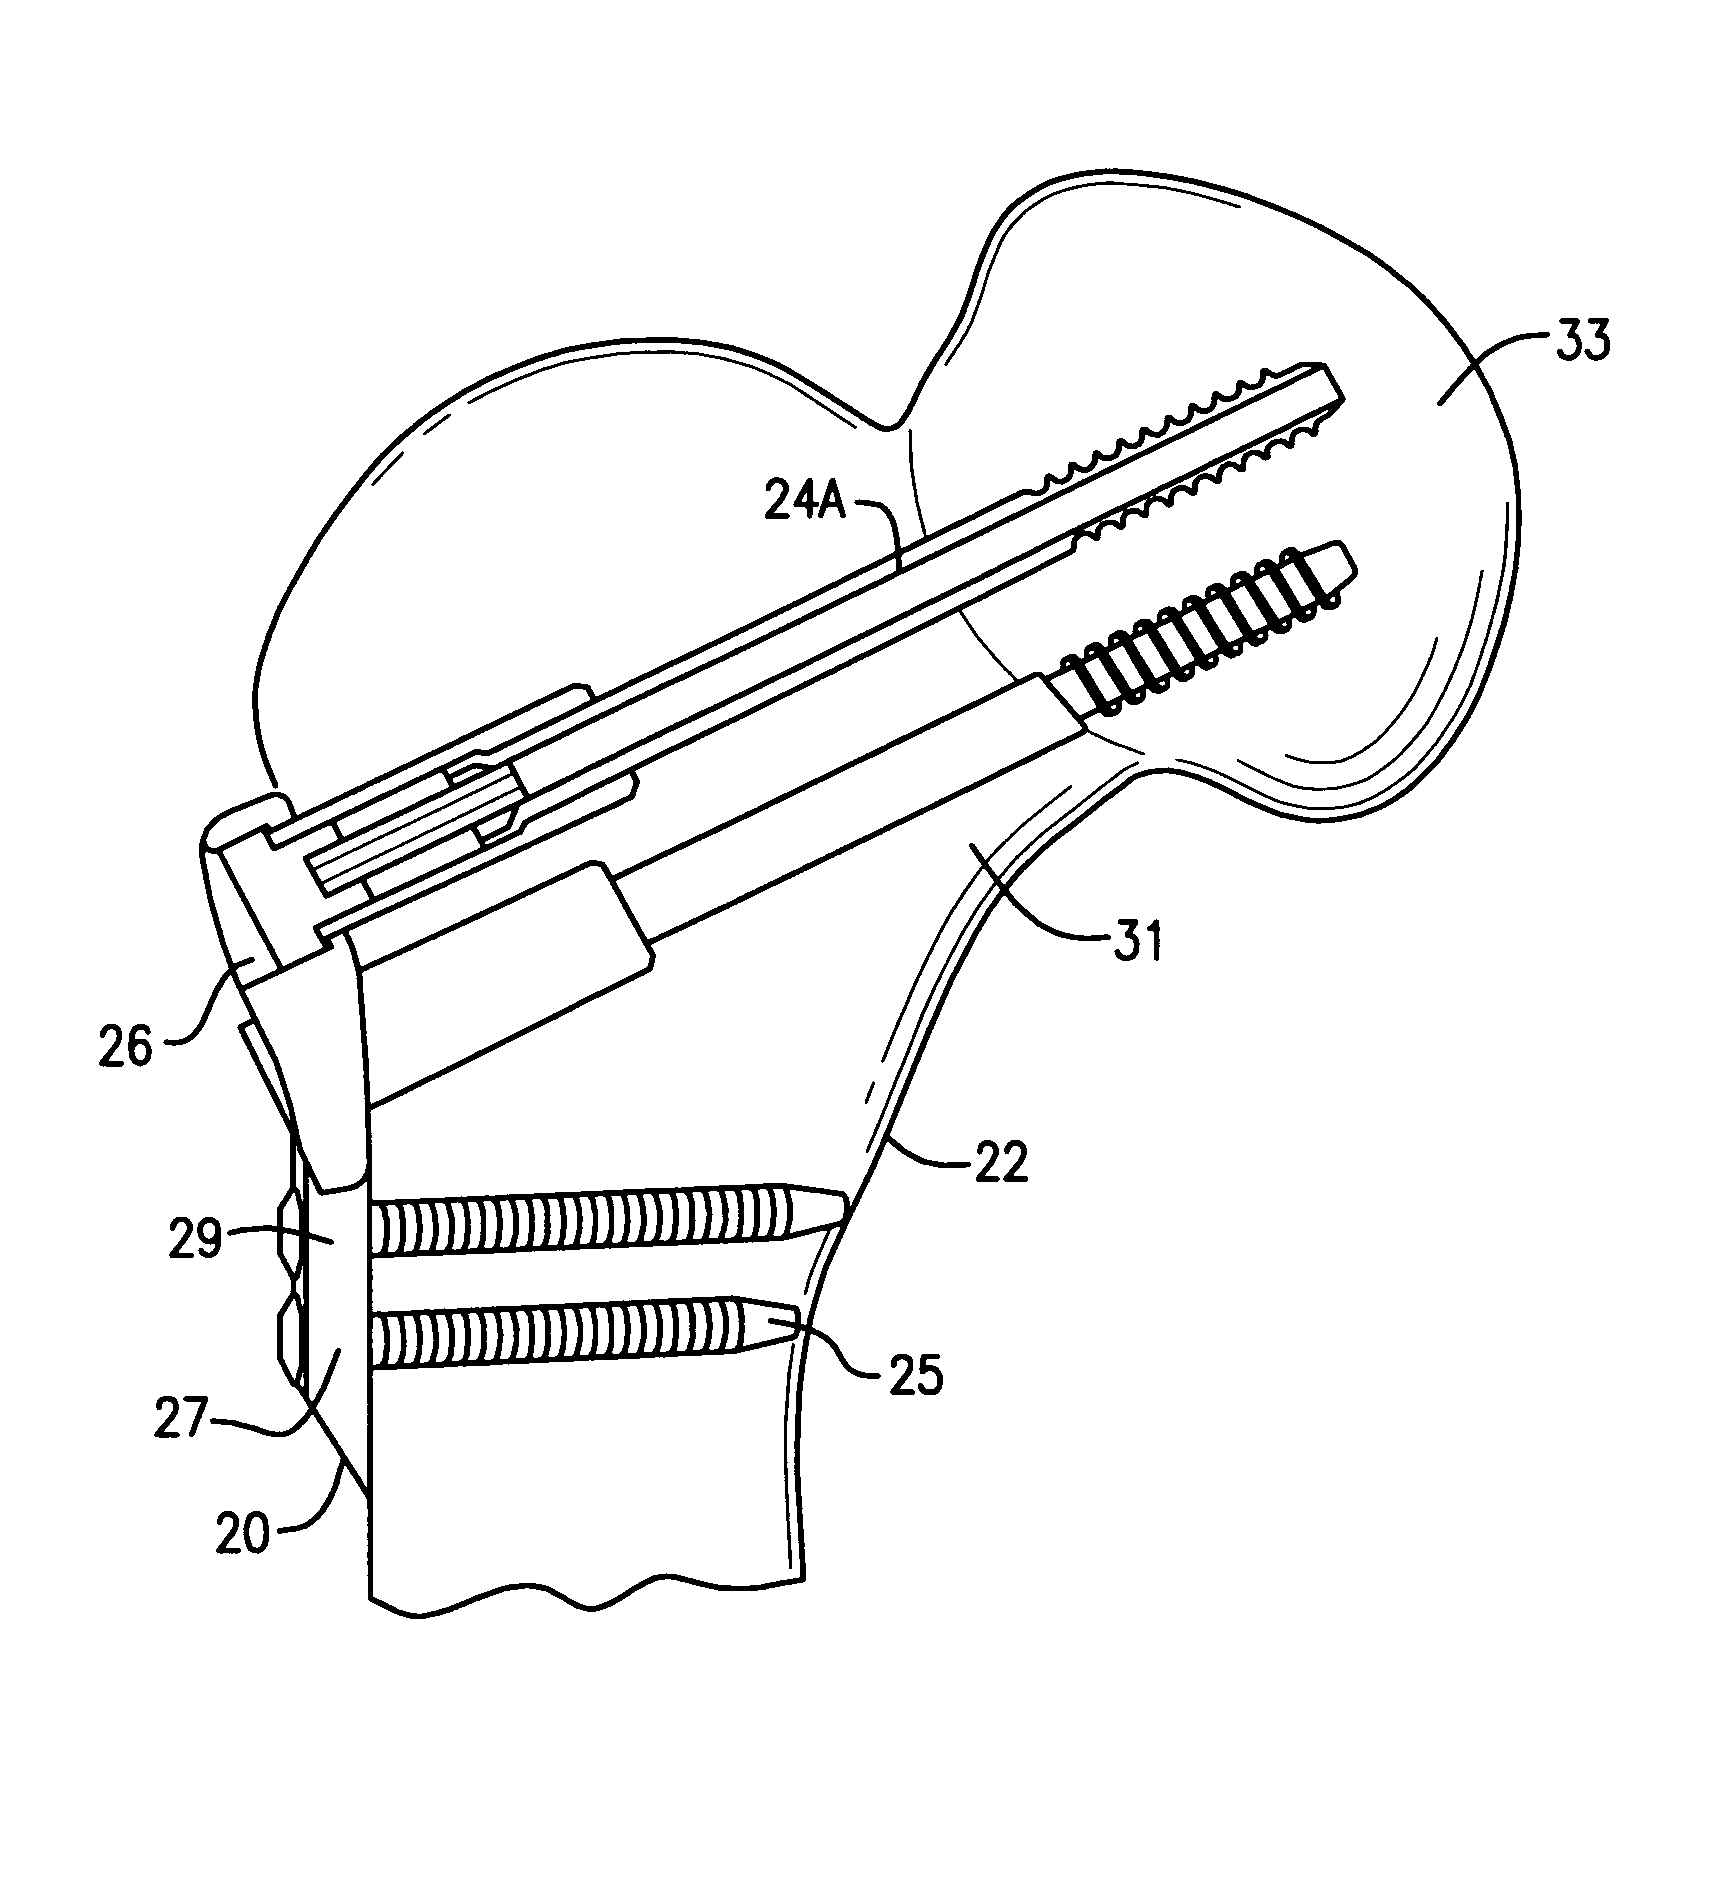 Hip fracture device with static locking mechanism allowing compression